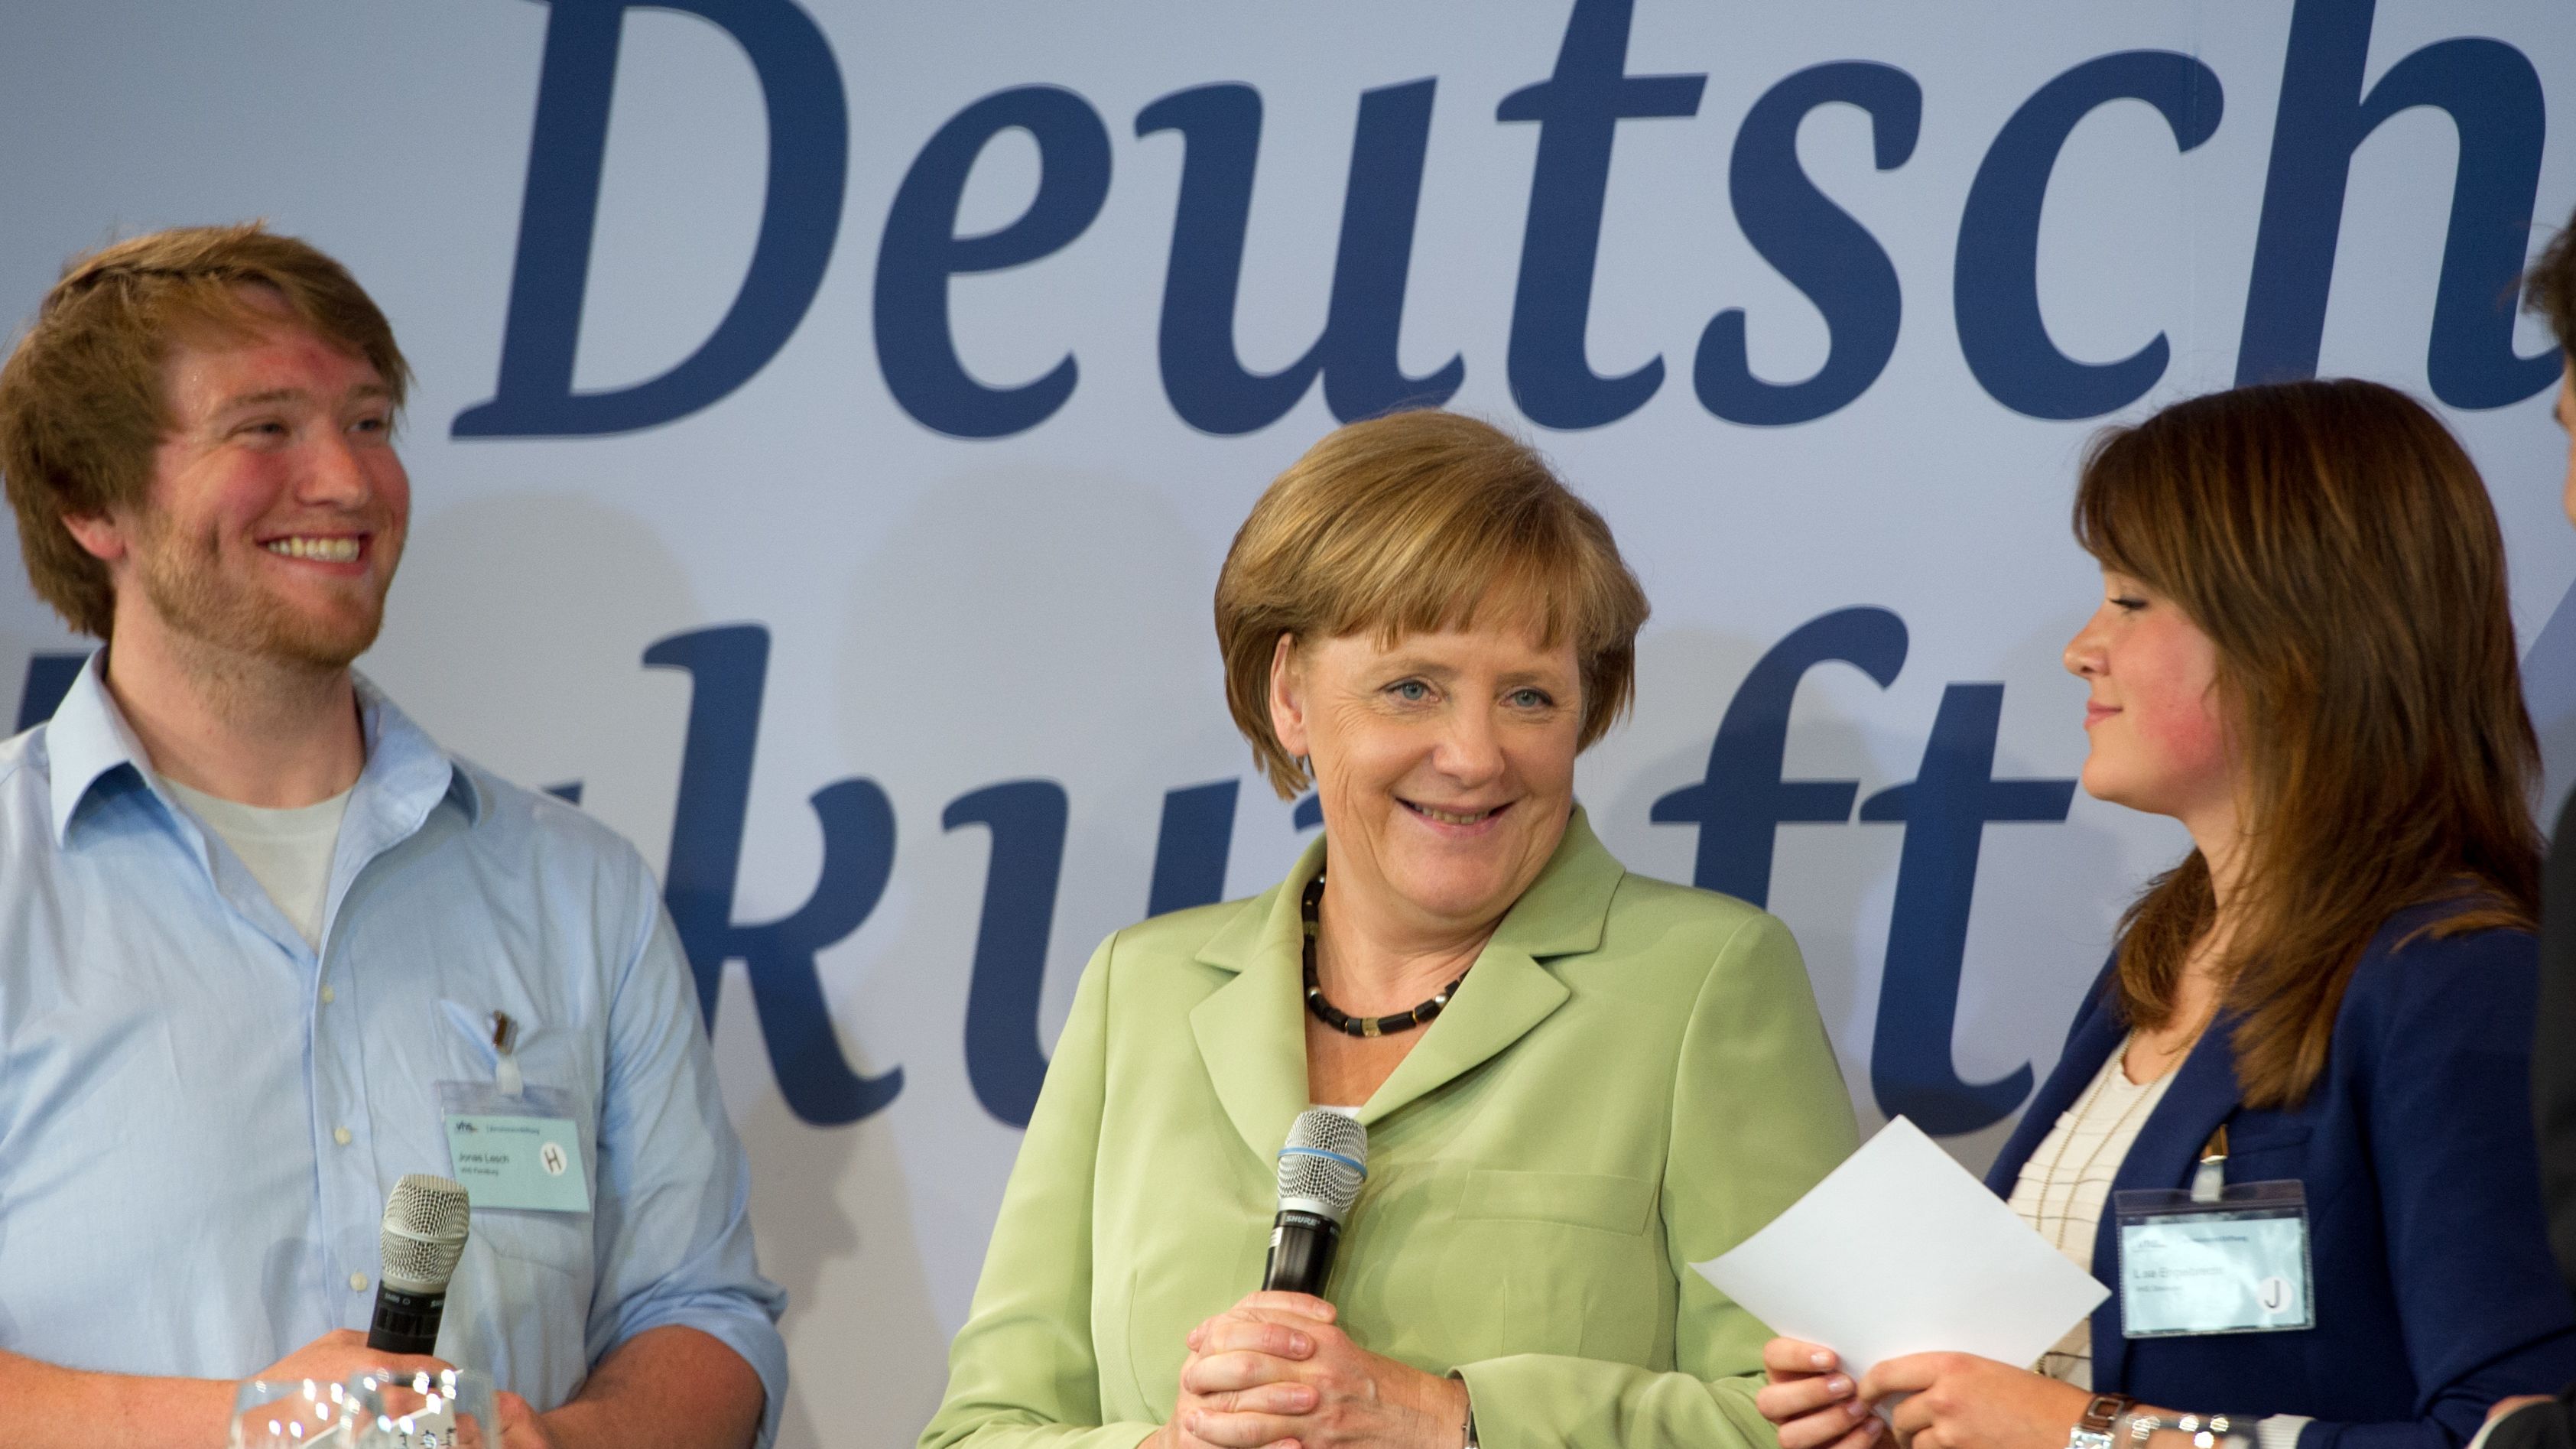 German Chancellor Angela Merkel talks with students during a discussion about Germany's future on June 6 in Berlin.